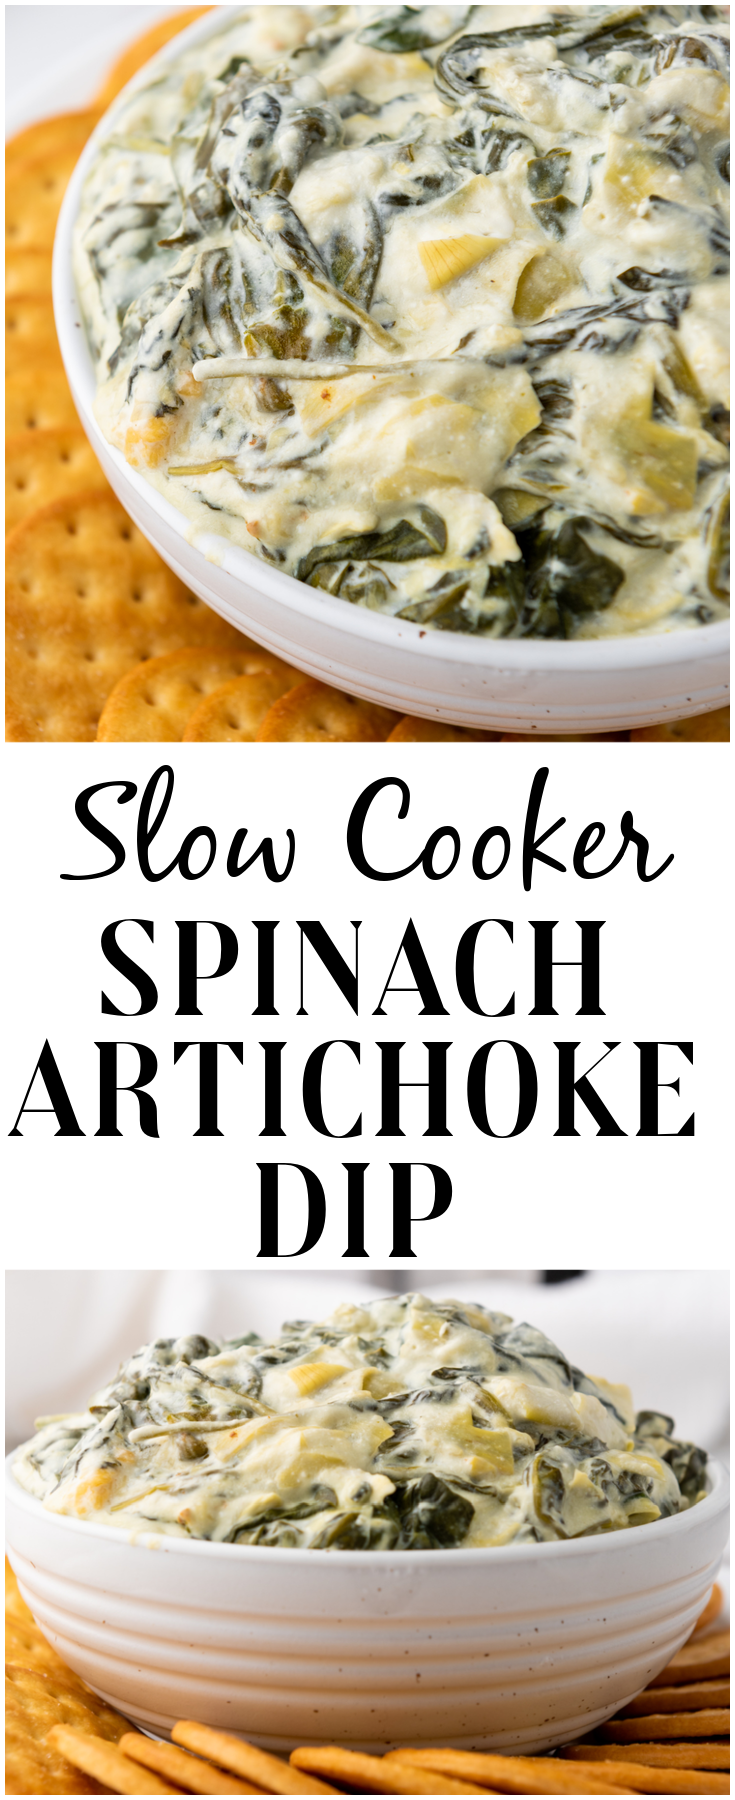 Slow Cooker Spinach Artichoke Dip is always a favorite at parties and get togethers. Make it with just a few simple ingredients in your slow cooker or crockpot for an easy way to feed a crowd.  #spinach #artichoke #dip #slowcooker #crockpot